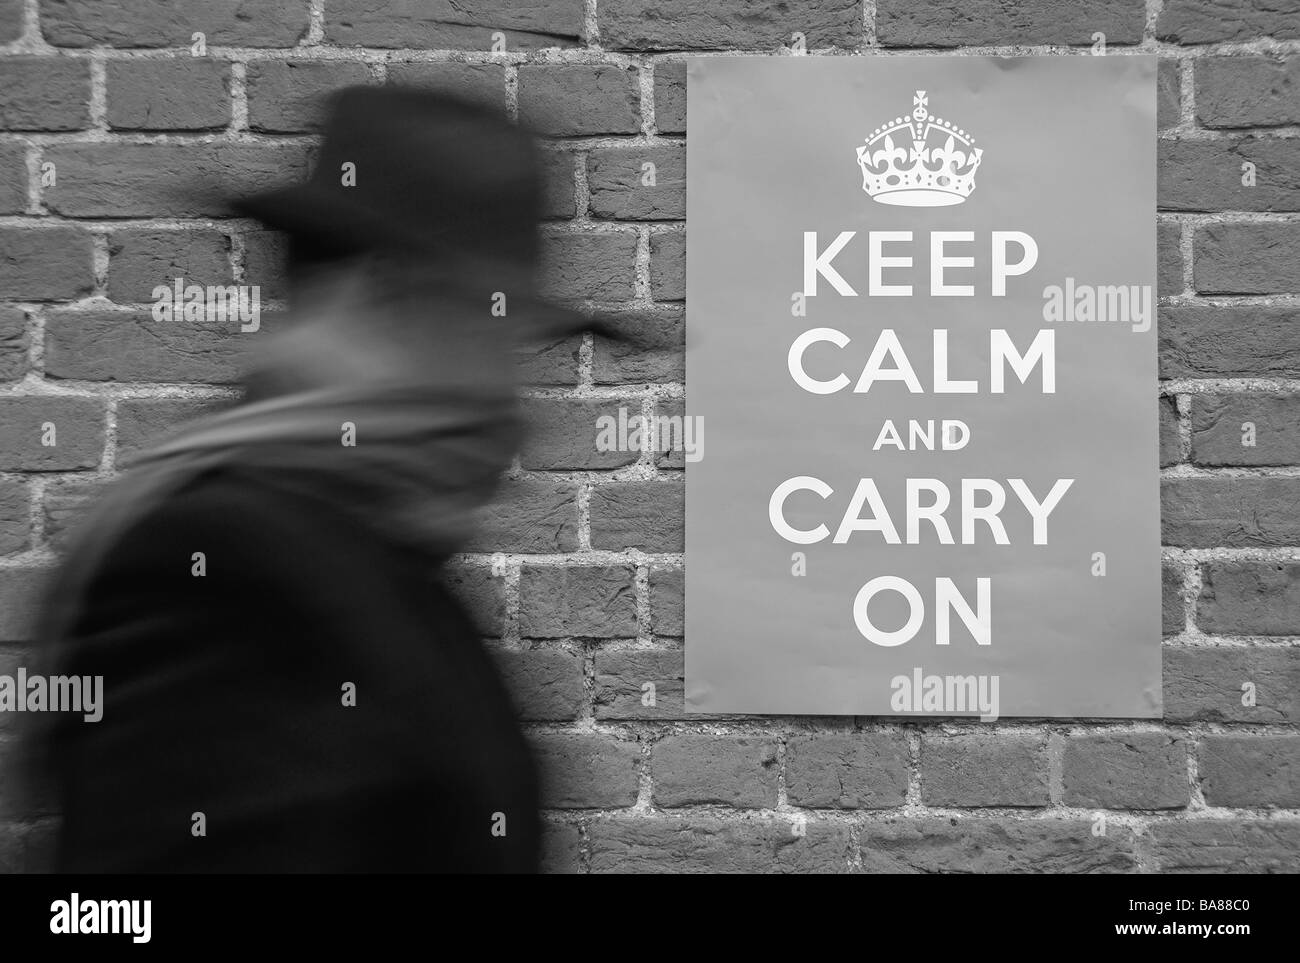 A man walking past a Second World War poster urging people to keep calm and carry on. Stock Photo